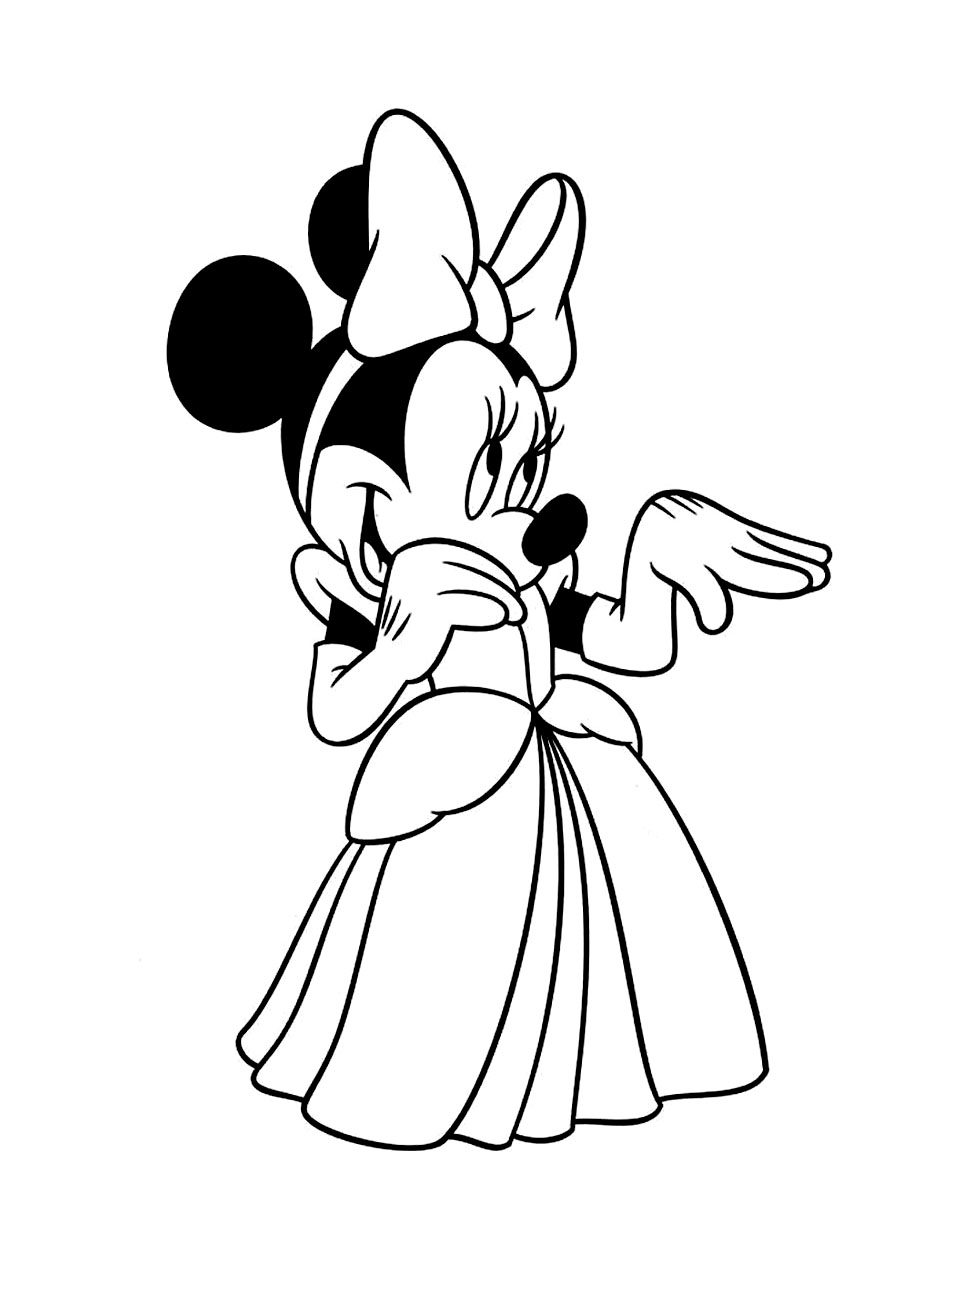 Minnie to print for free - Minnie Kids Coloring Pages